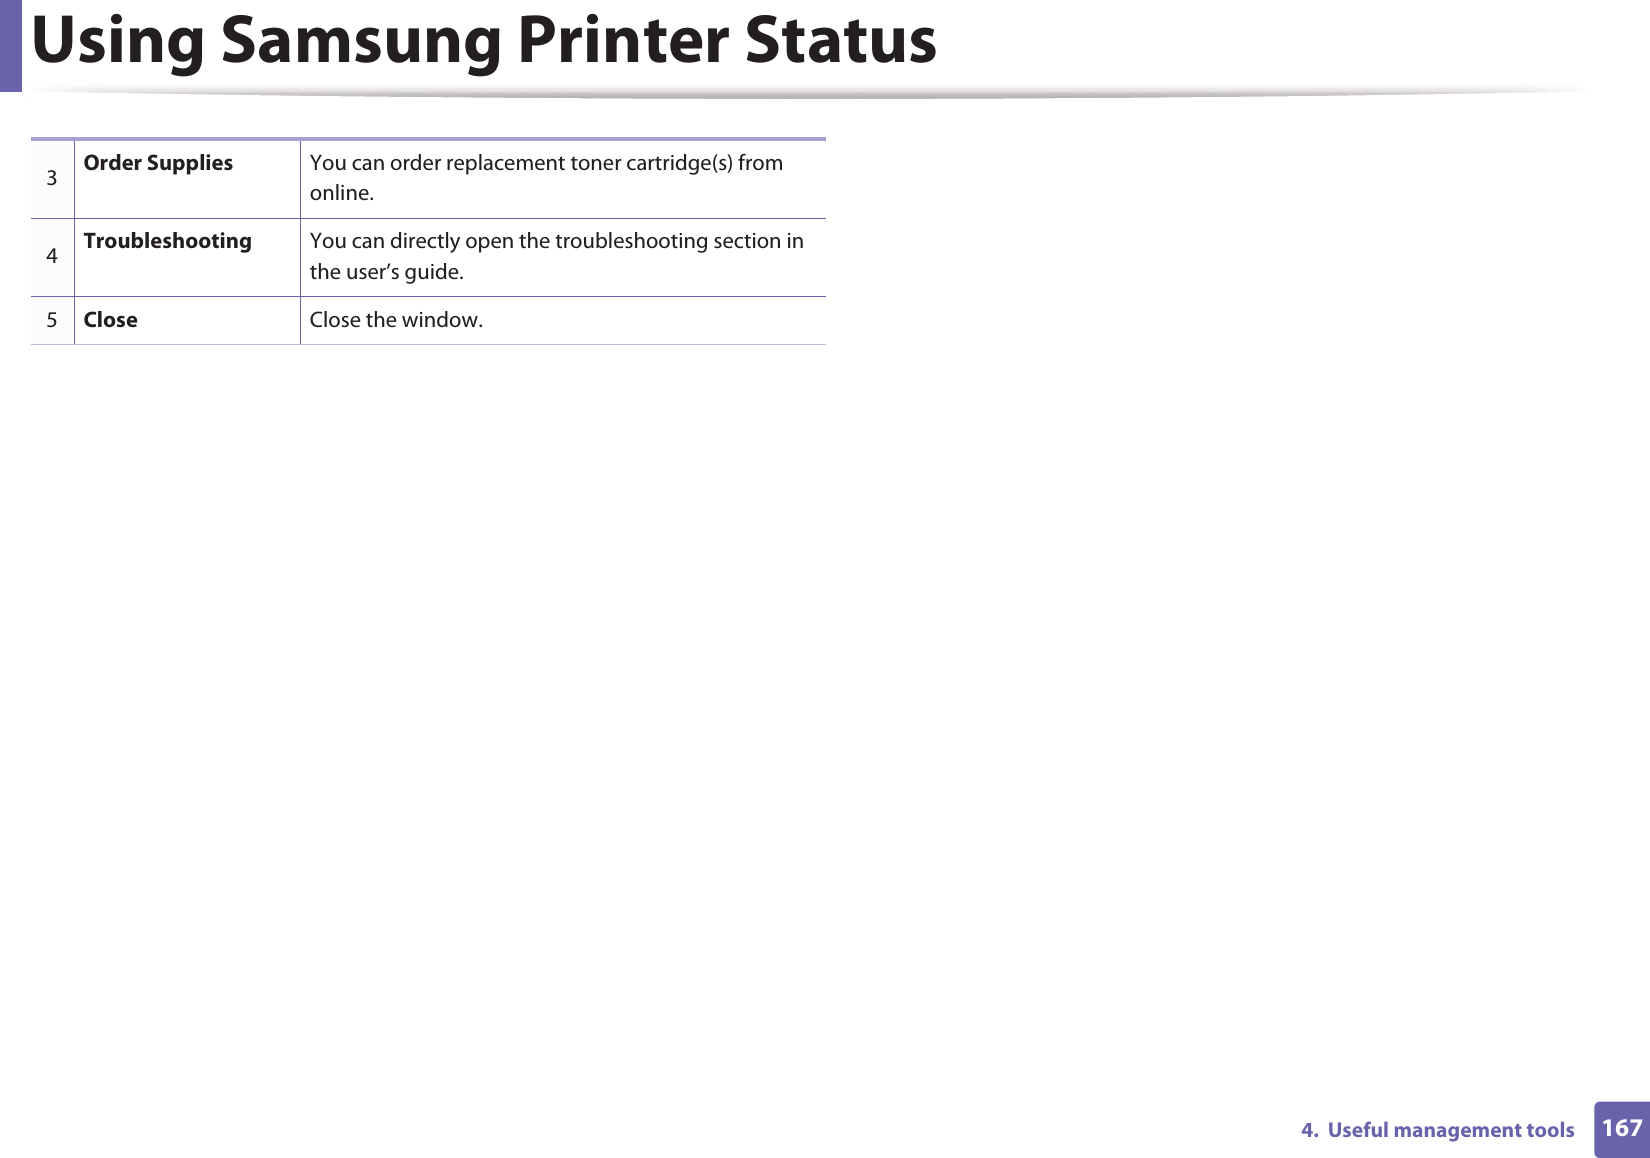 Using Samsung Printer Status1674.  Useful management tools3Order Supplies You can order replacement toner cartridge(s) from online.4Troubleshooting You can directly open the troubleshooting section in the user’s guide.5Close Close the window.